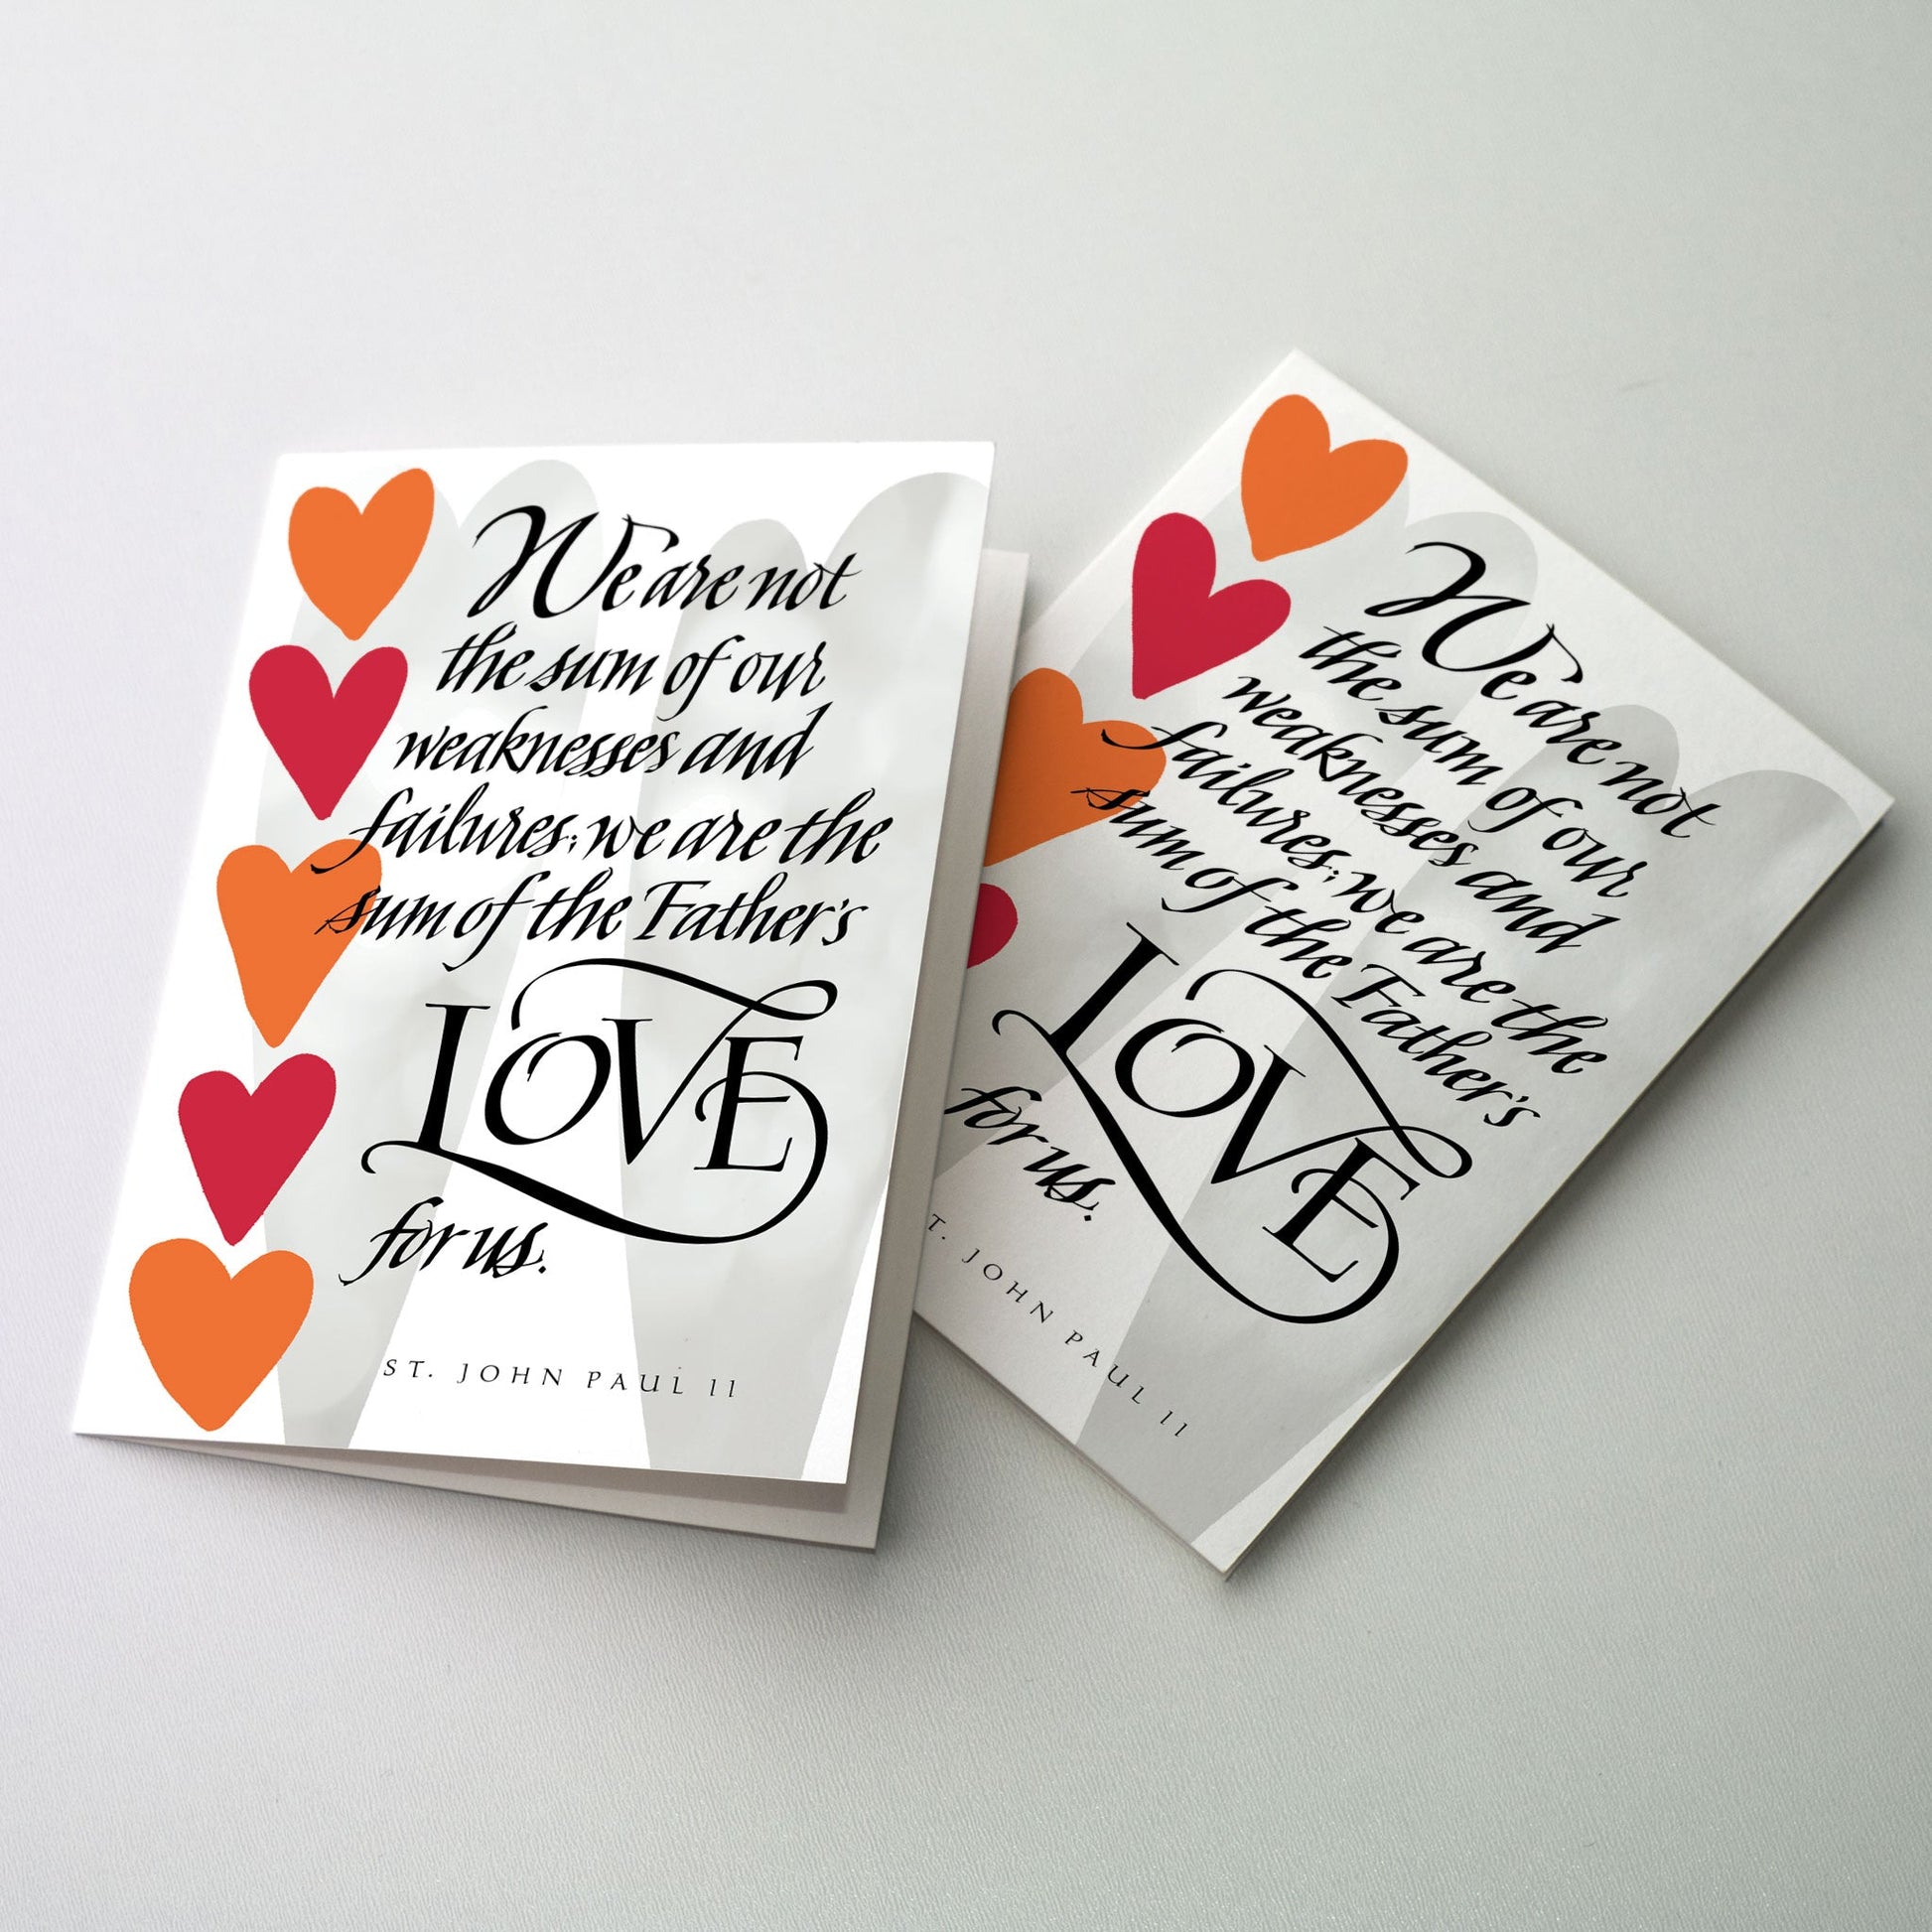 gray, orange, and red hearts with black calligraphy